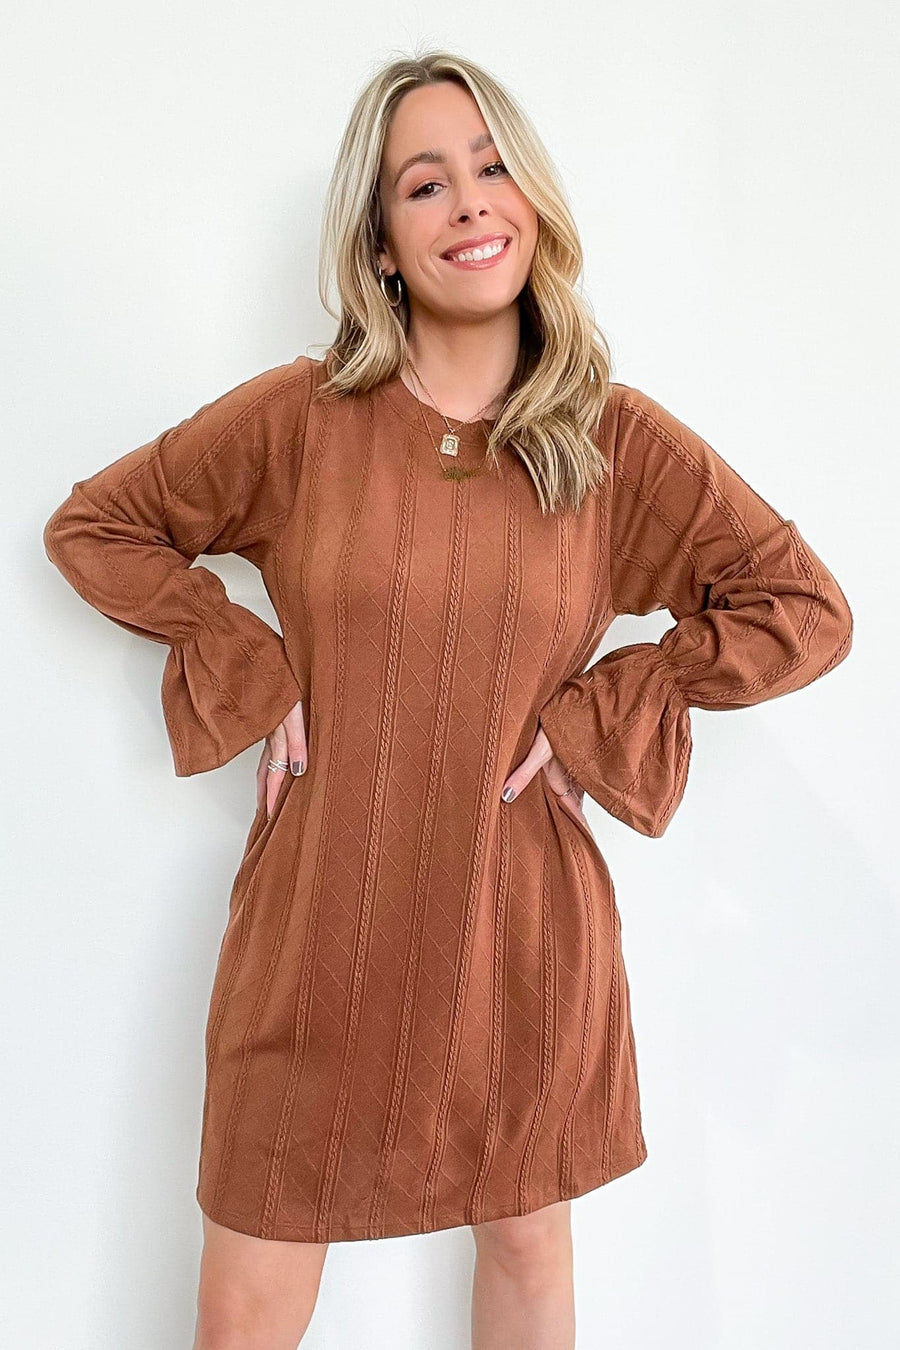  Call Me Cozy Cable Knit Bell Sleeve Dress - FINAL SALE - Madison and Mallory